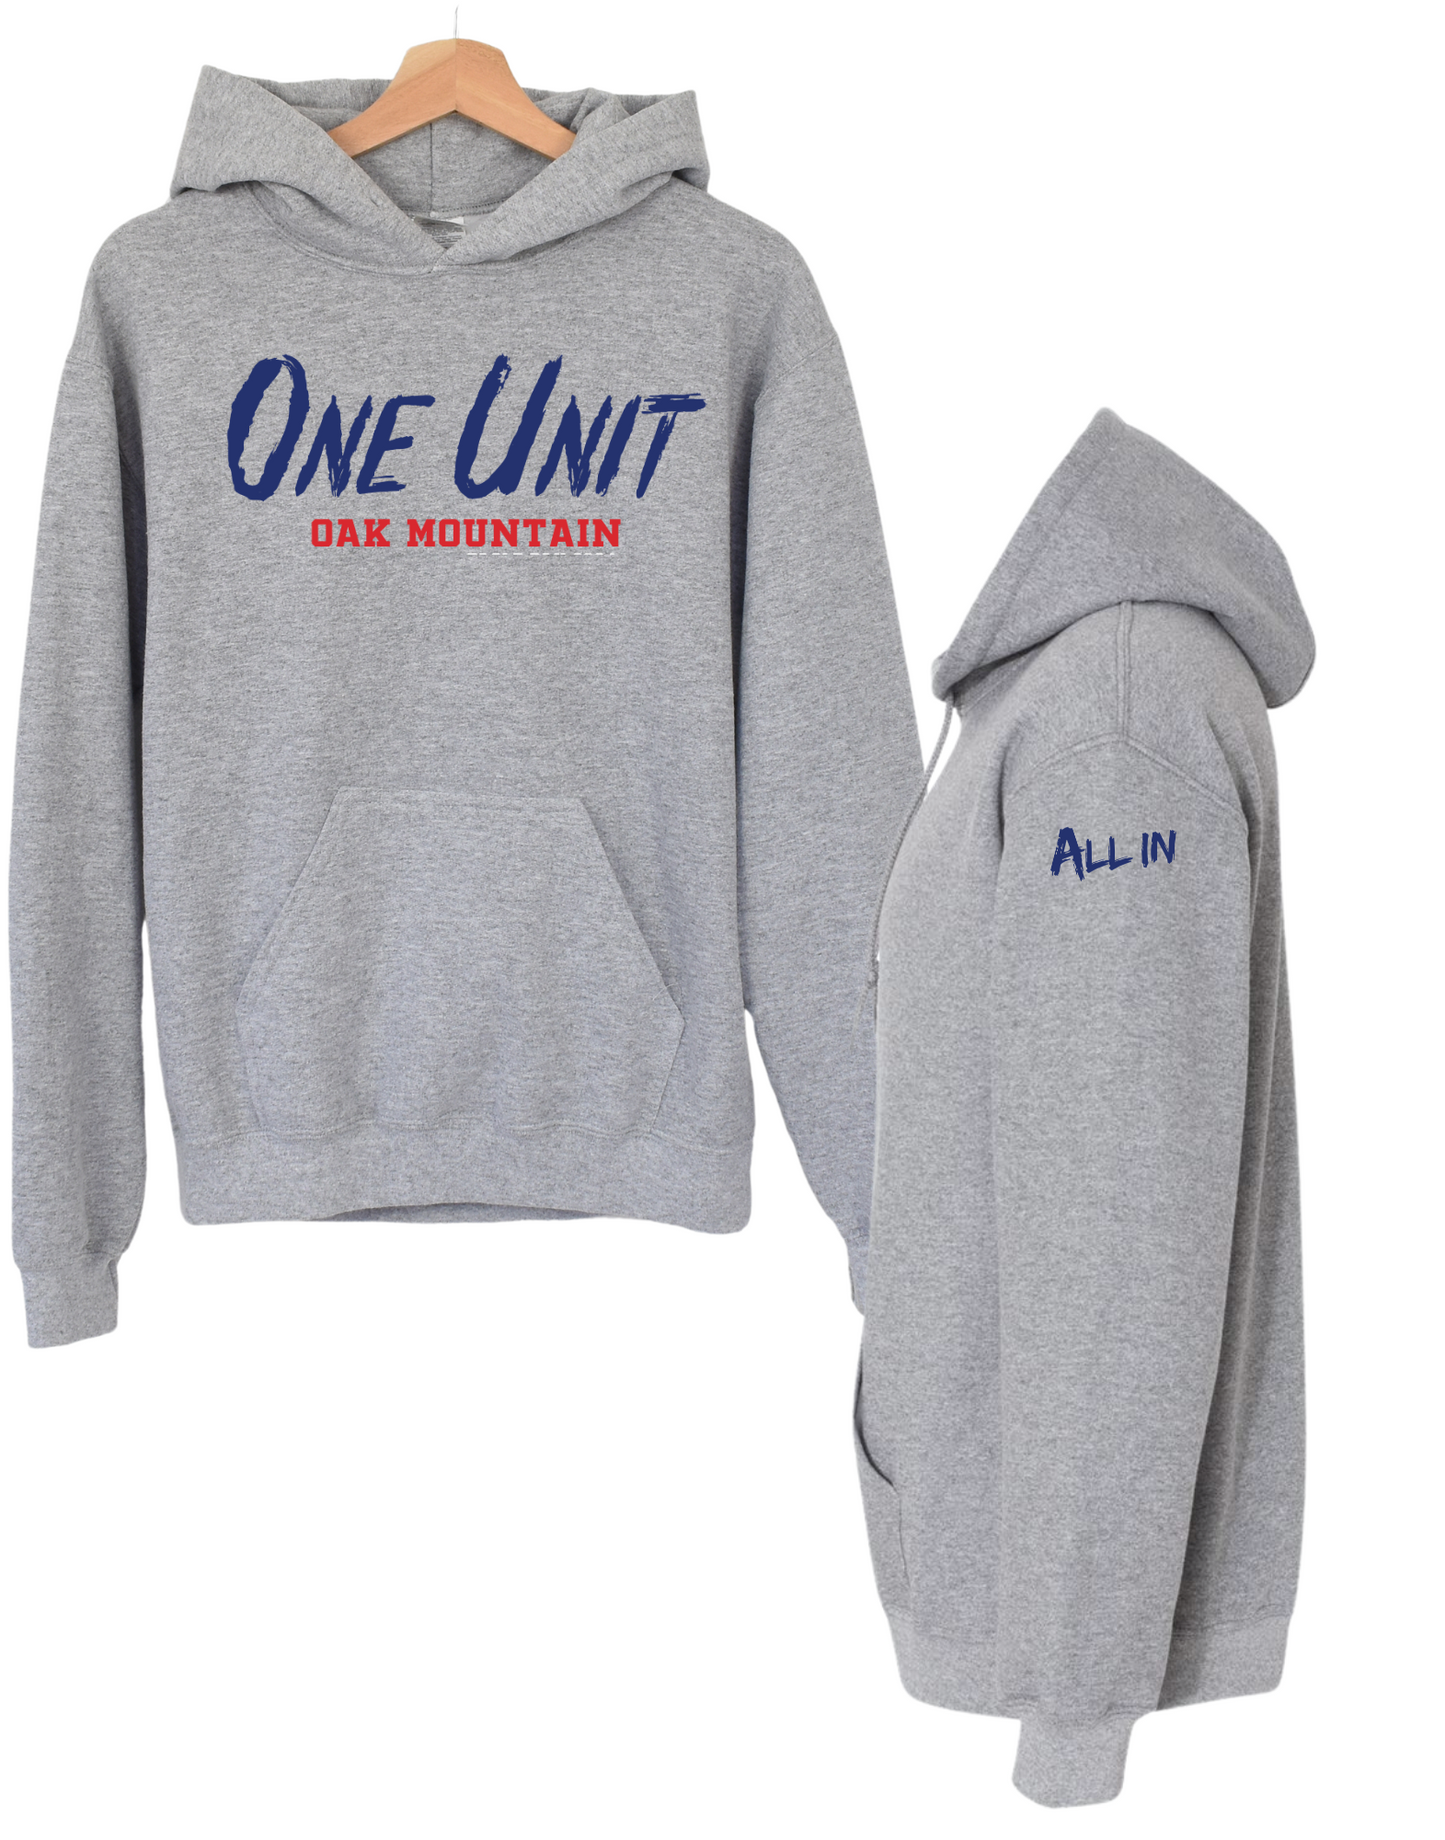 ALL IN EAGLE DAY - HOODIES YOUTH -ADULT